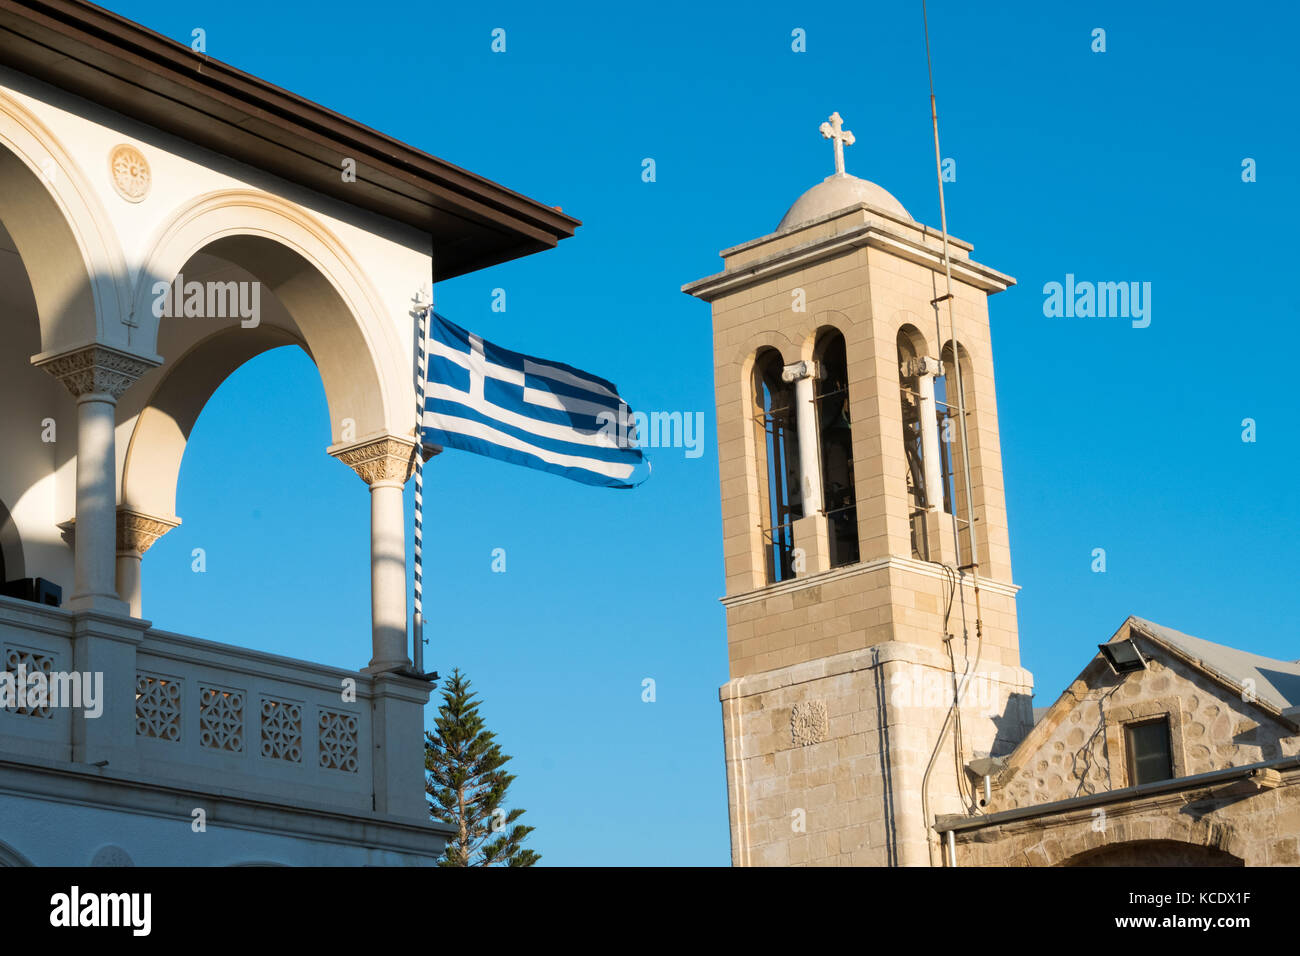 The flag of Greece flies on Holy Bishopric of Pafos, left and Agios Theodoros Cathedral on the right in Resistance Square ,Paphos Old Town, Cyprus Stock Photo